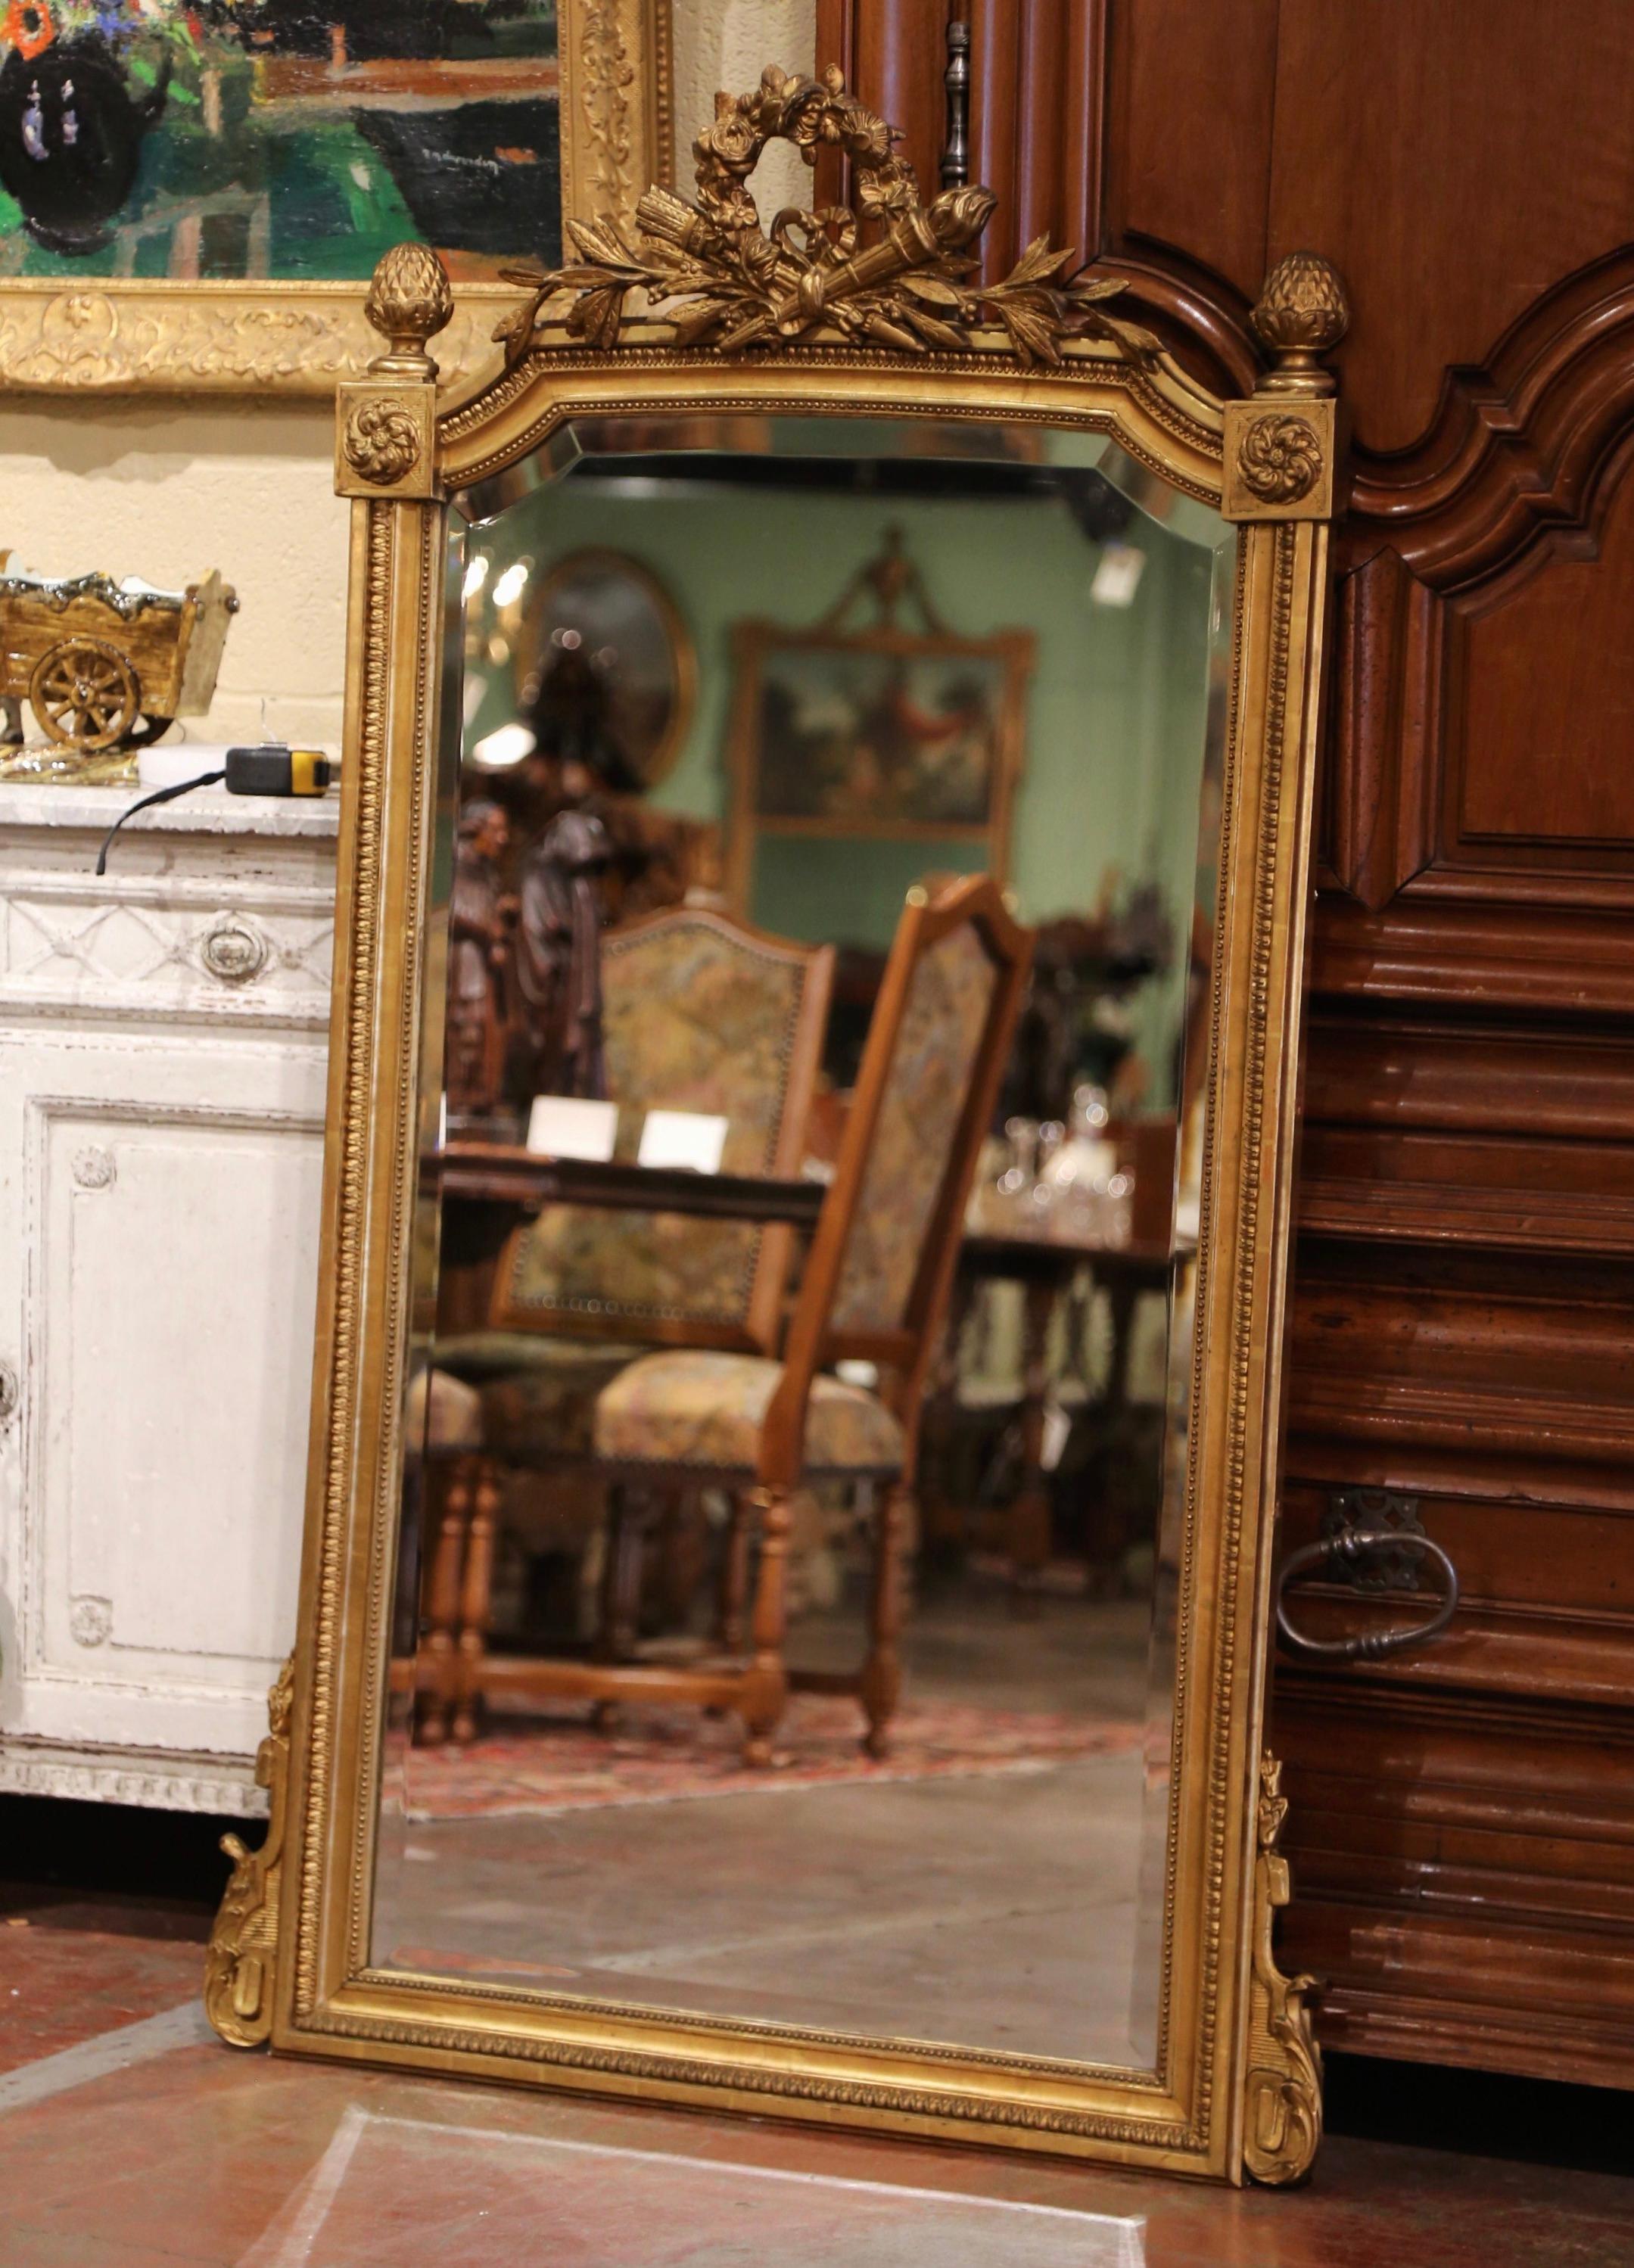 Decorate a powder room or an entry way with this elegant and tall antique mirror! Crafted in France circa 1870, the rectangular mirror with curved top and concave corners, features an intricate cartouche at the pediment embellished with crossed